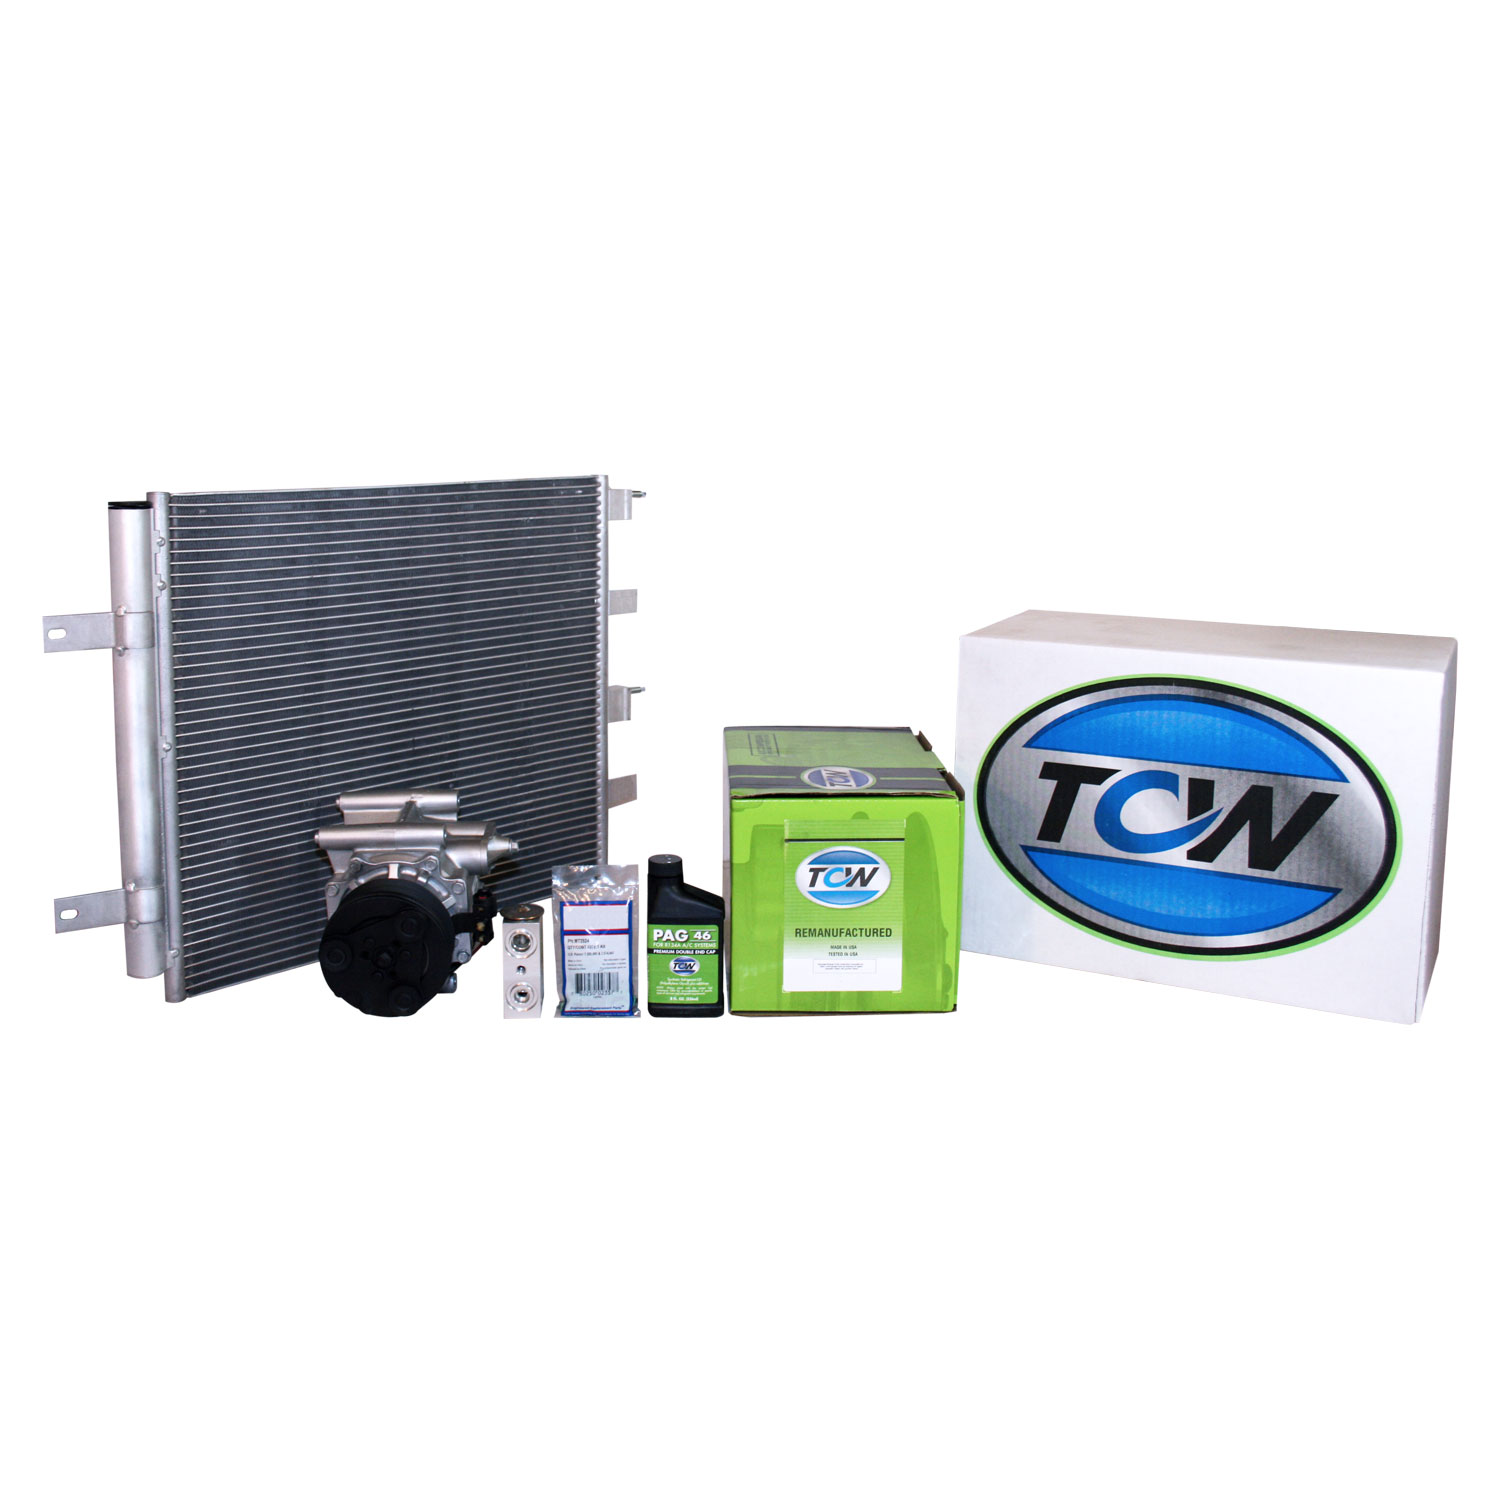 TCW Vehicle A/C Kit KC100066R Remanufactured Product Image field_60b6a13a6e67c